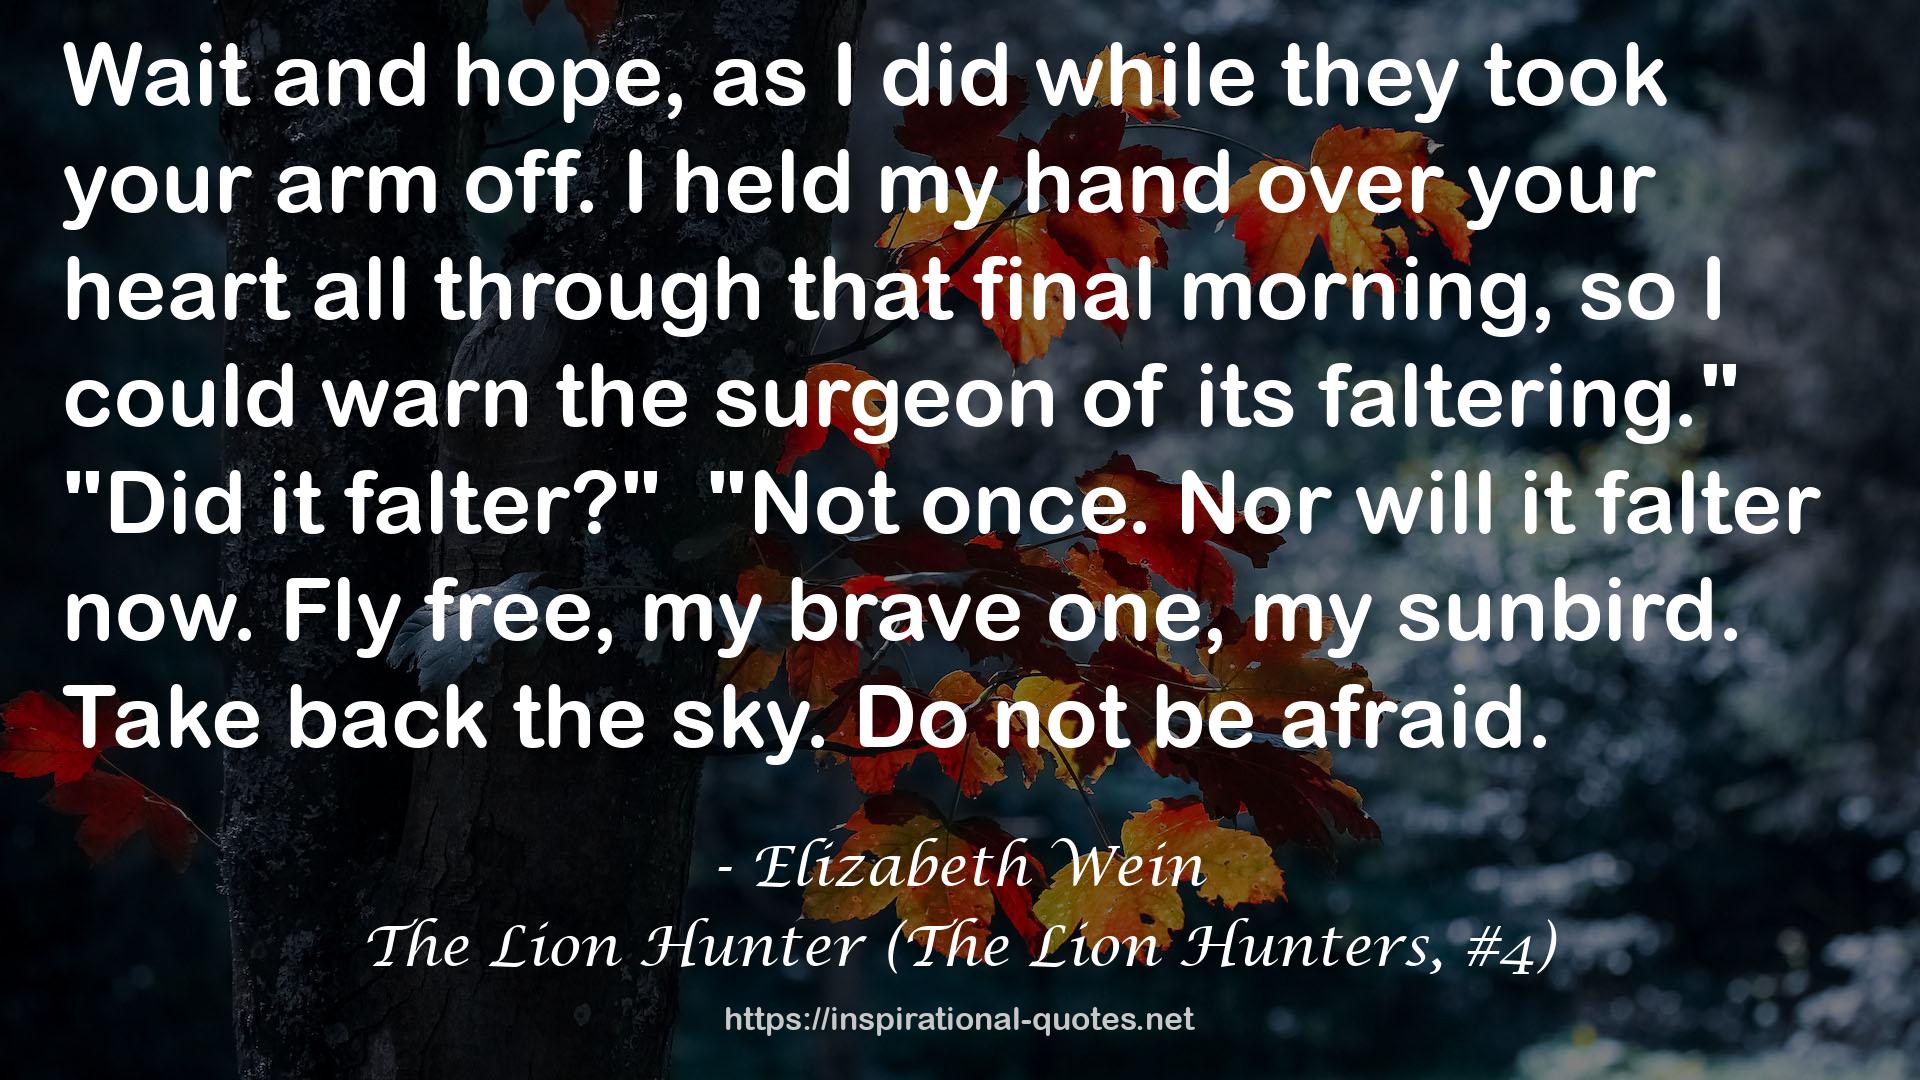 The Lion Hunter (The Lion Hunters, #4) QUOTES